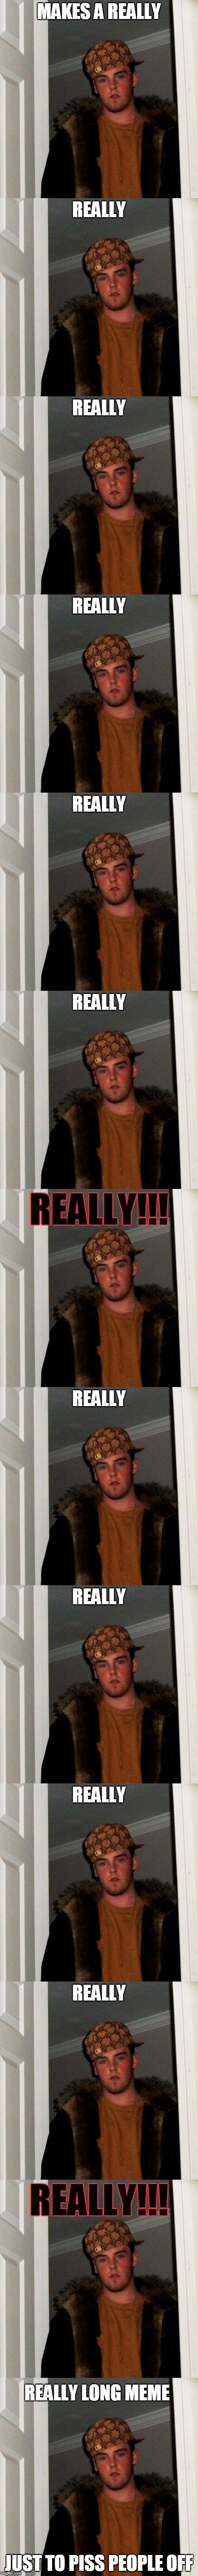 Enough Scumbag Steve for a week | MAKES A REALLY; REALLY LONG MEME; JUST TO PISS PEOPLE OFF | image tagged in memes,scumbag steve,funny,long,anger,good luck | made w/ Imgflip meme maker